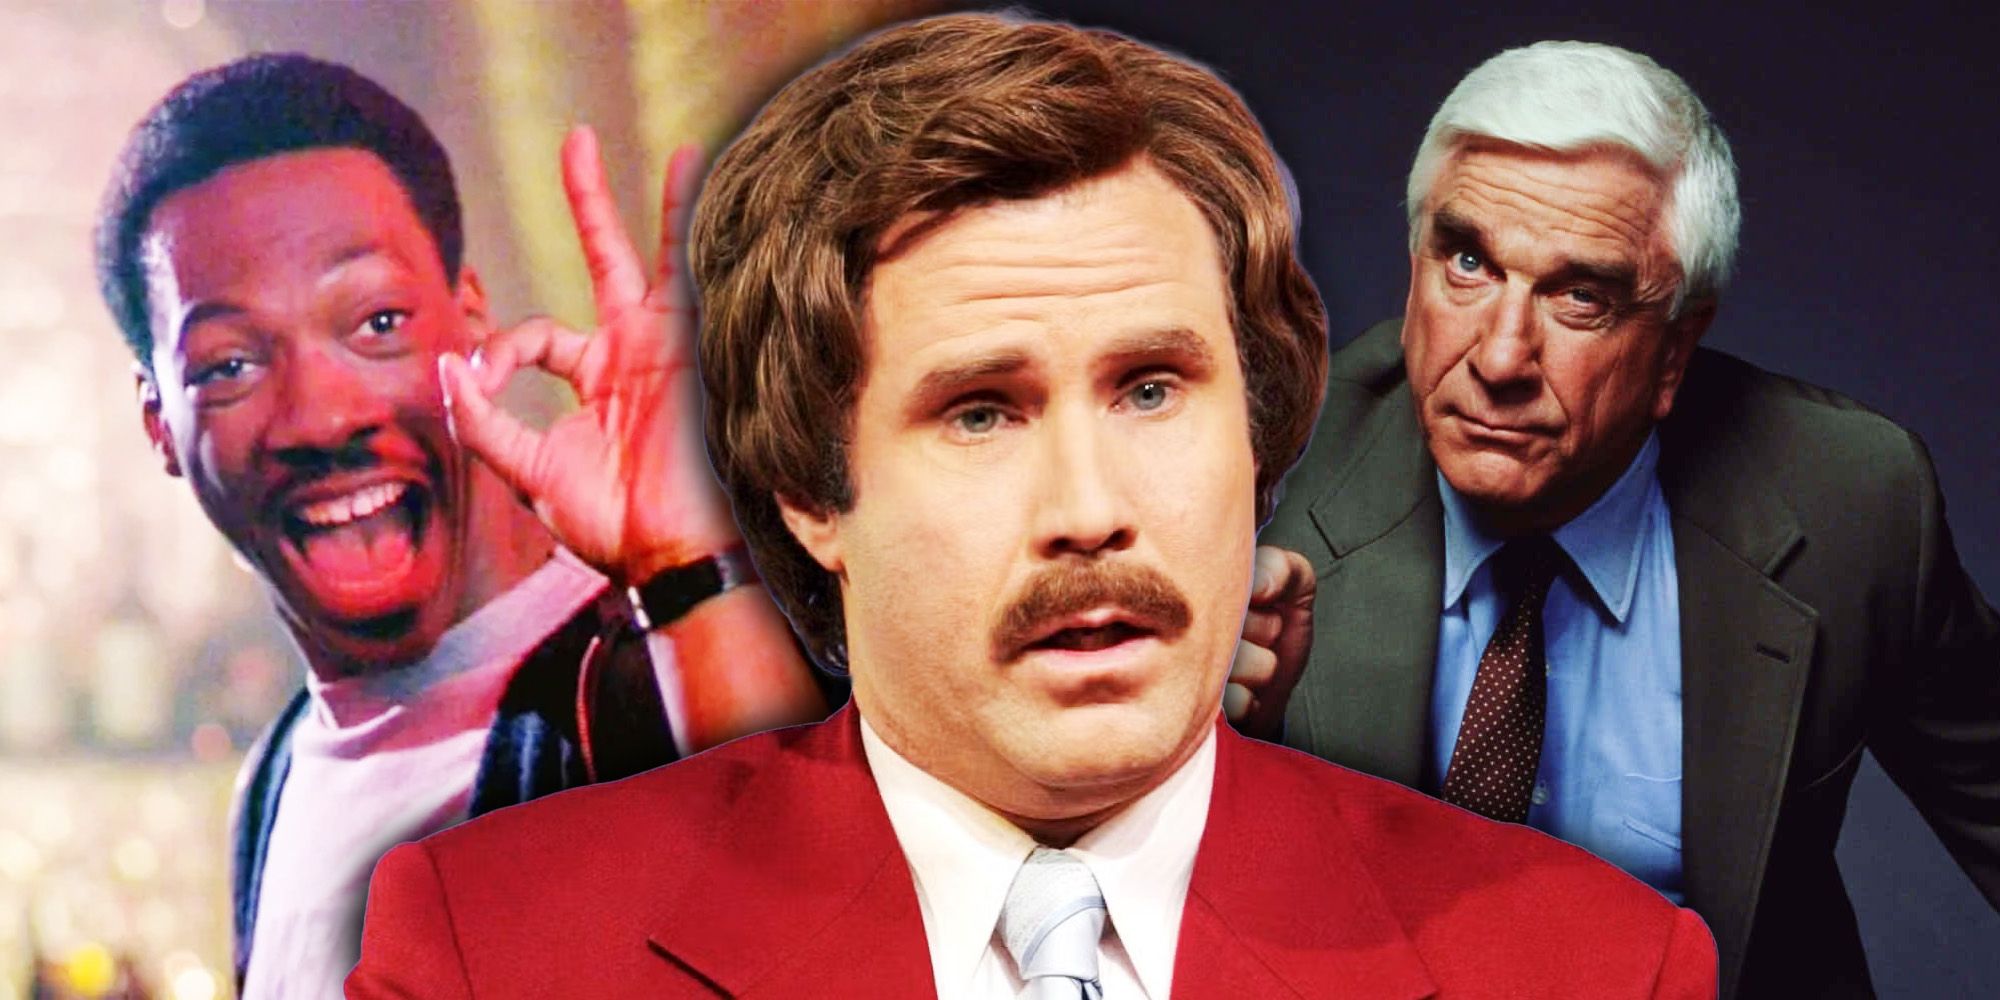 iconic men in comedy movies collage: Eddie Murphy in Beverly Hills Cop, Will Ferrell in Anchorman and Leslie Nielsen in The Naked Gun